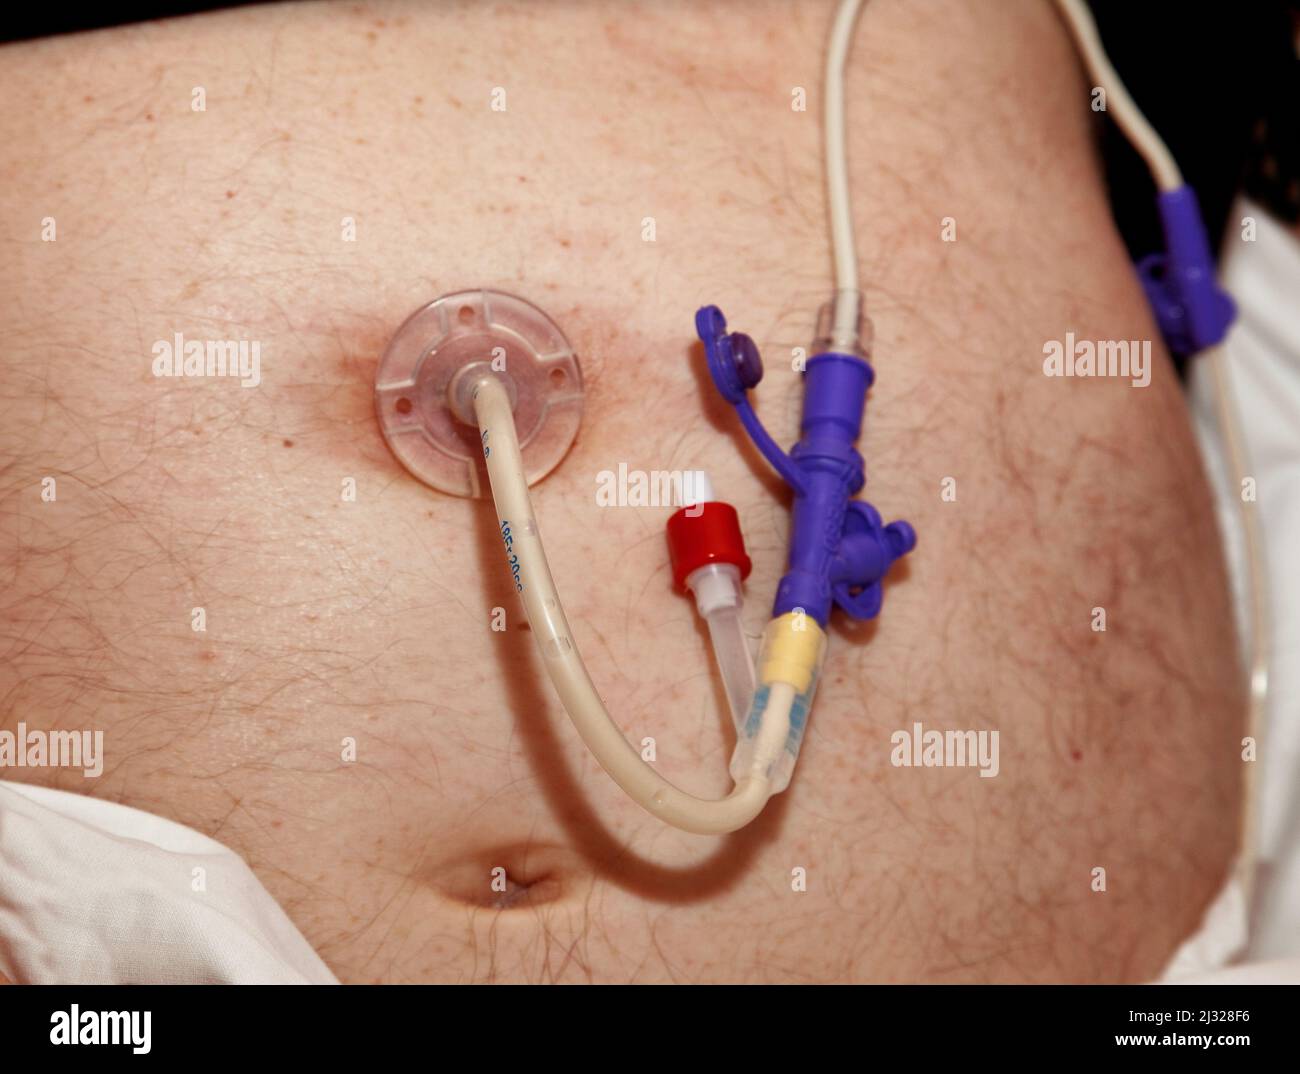 Percutaneous endoscopic gastrostomy (PEG) is an endoscopic medical procedure in which a tube (PEG tube) is passed into a patient's stomach through the Stock Photo